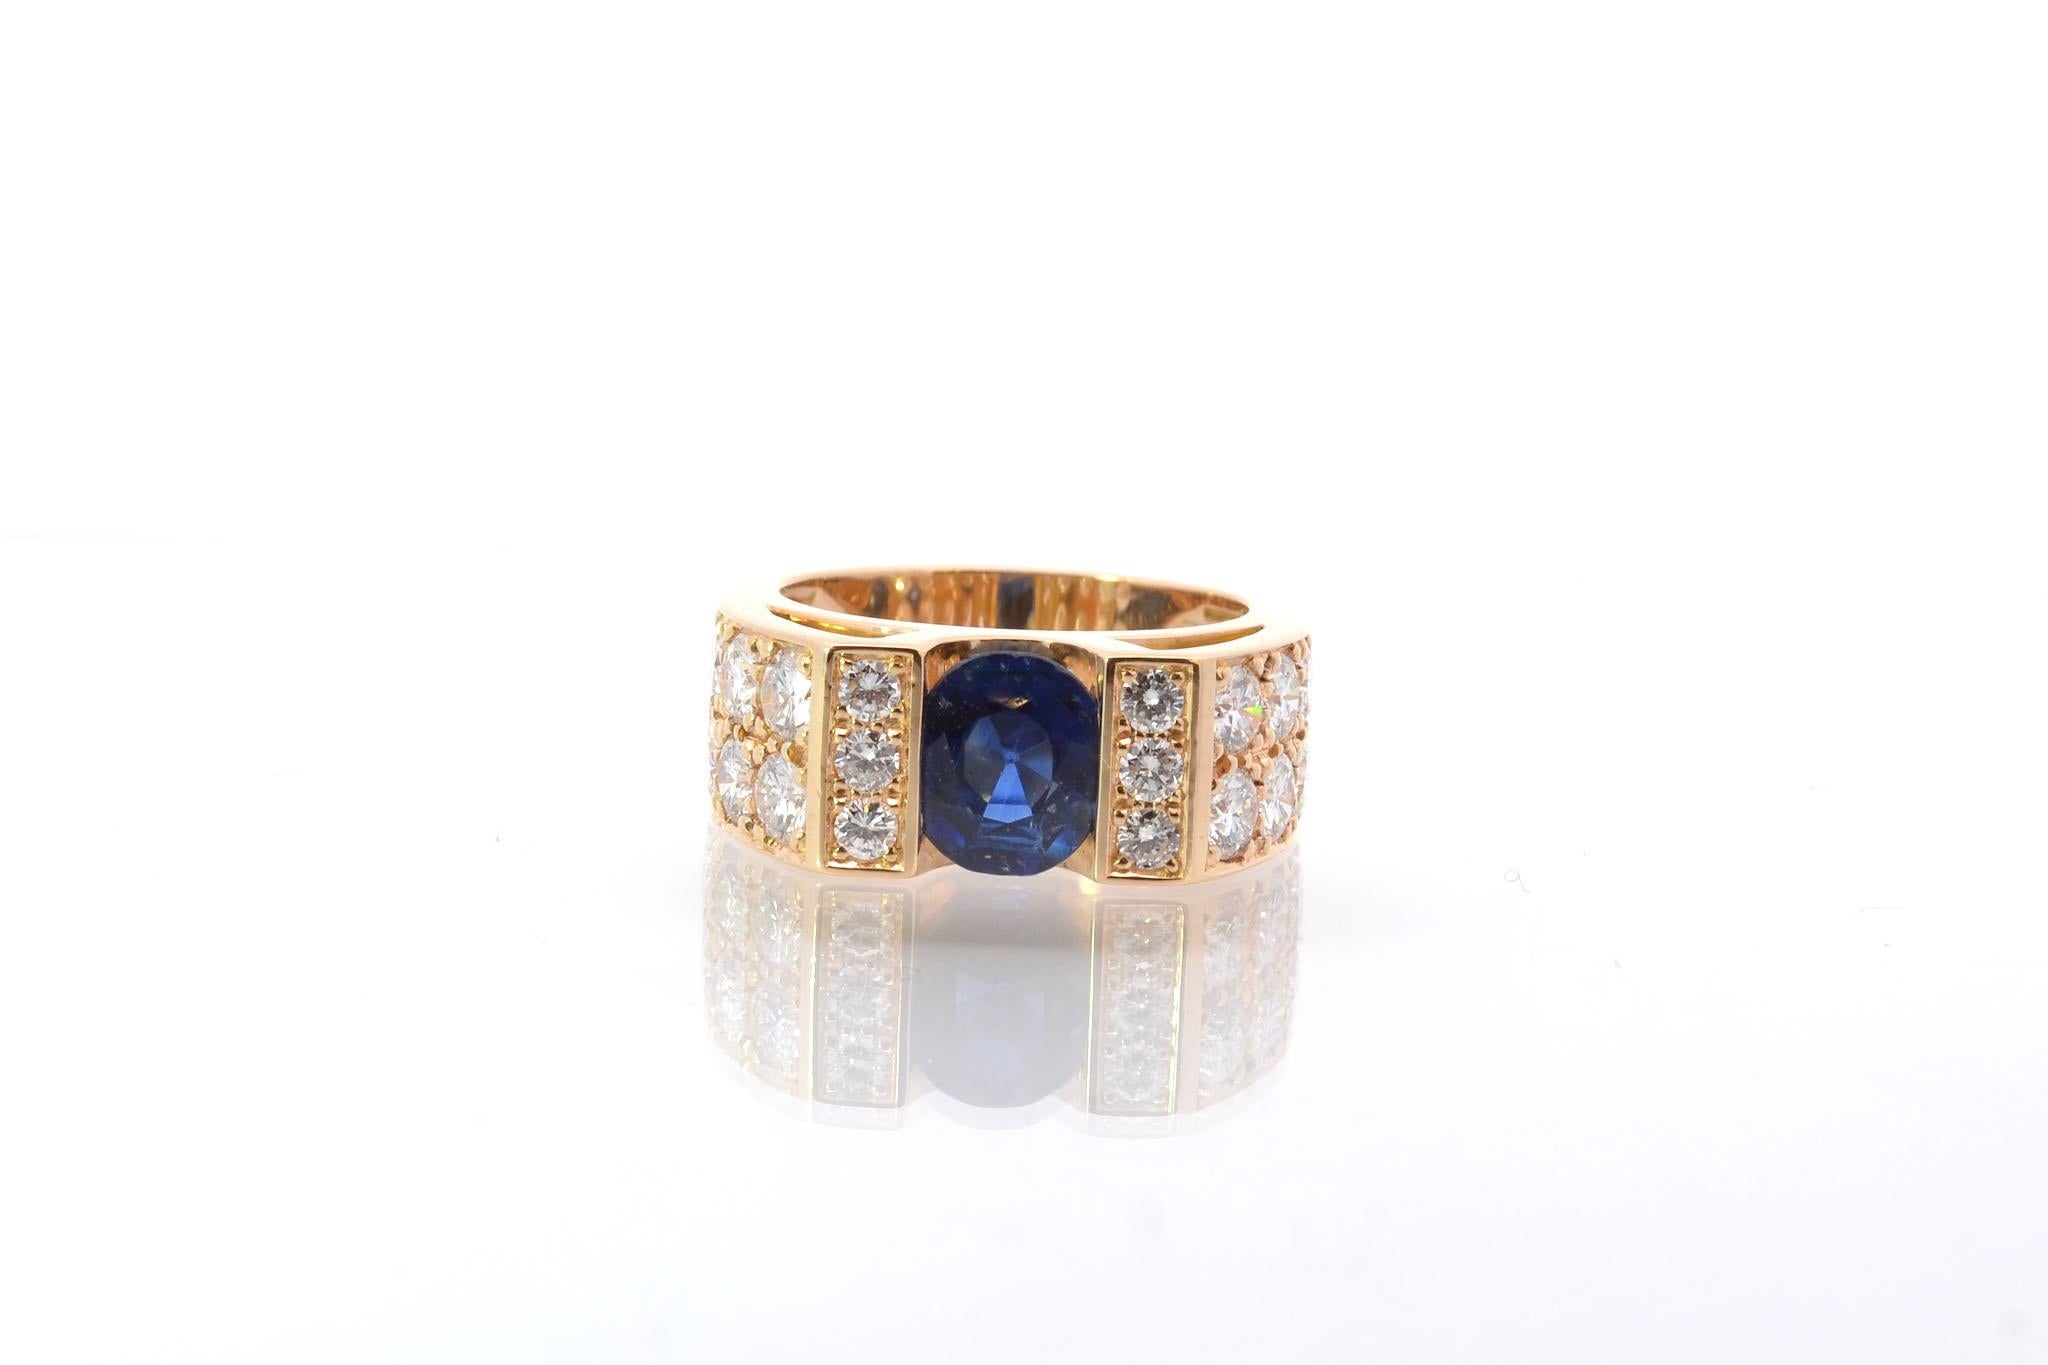 Stones: Siam sapphire of 1.90 cts and 22 diamonds for a total weight of 2.30 cts
Material: 18k yellow gold
Weight: 9.7g
Period: 1980
Size: 55 (free sizing)
Certificate
Ref. : 25503